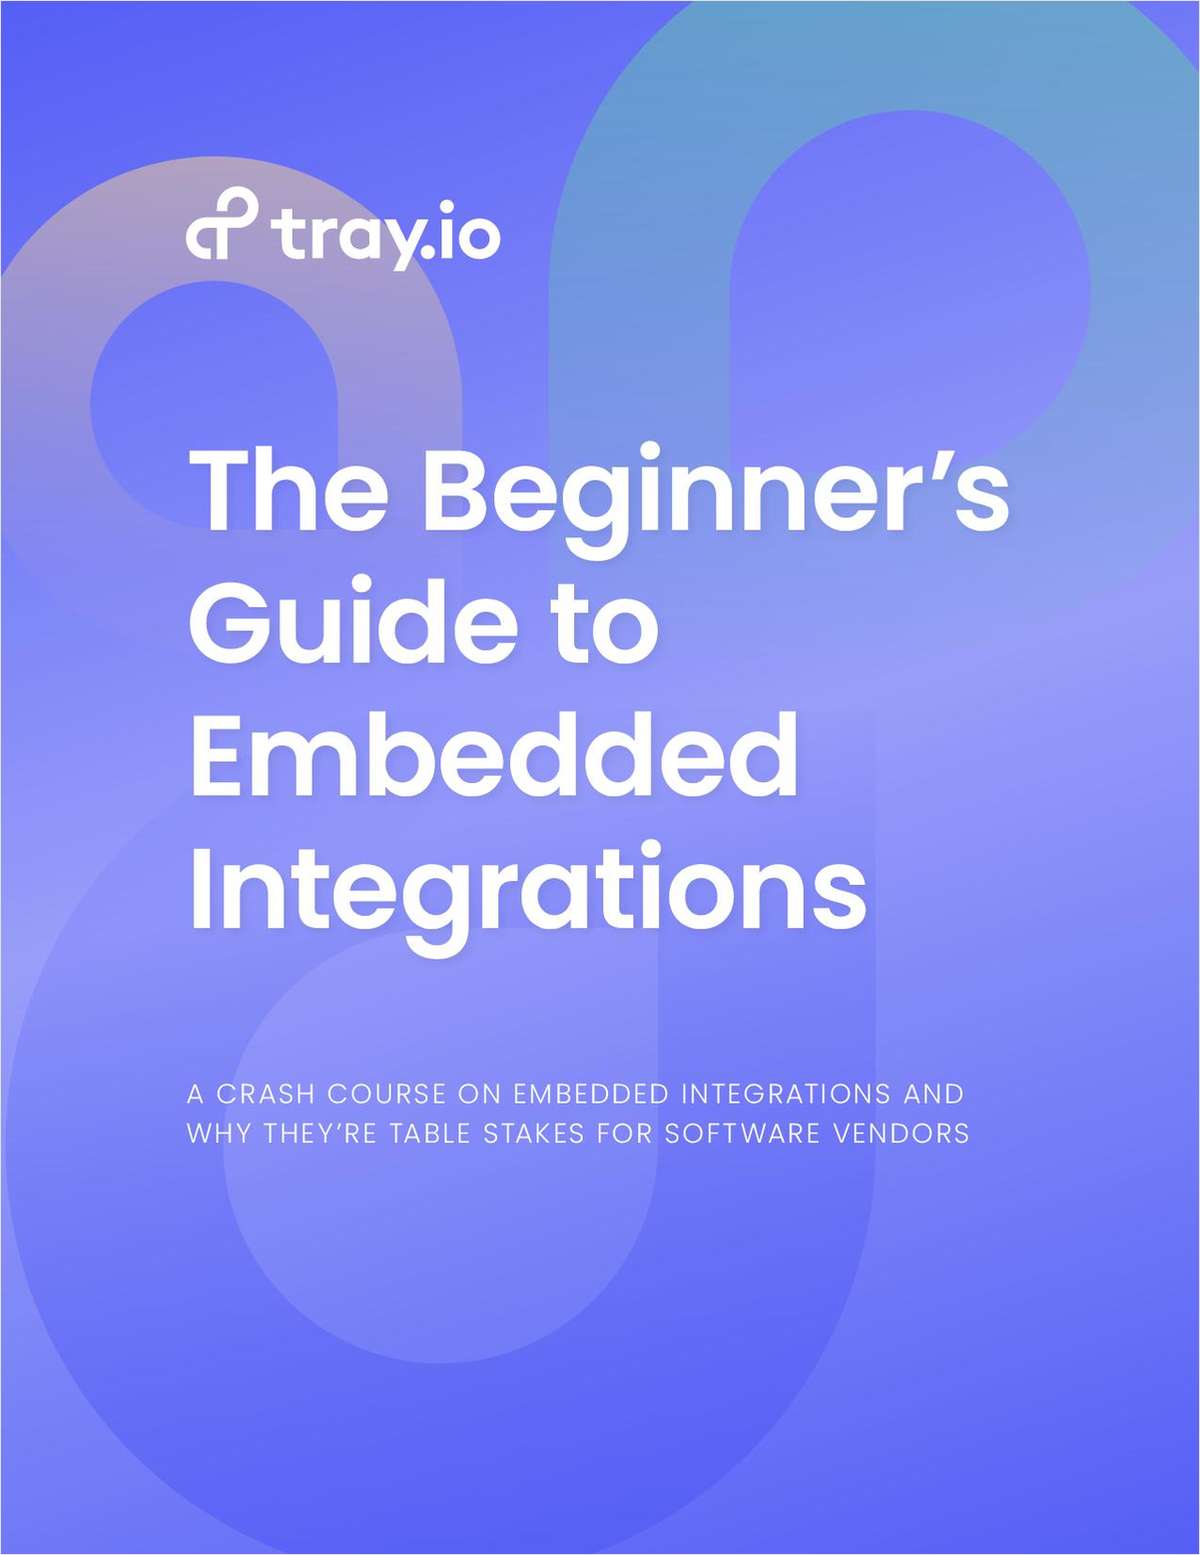 The Beginner's Guide to Embedded Integrations